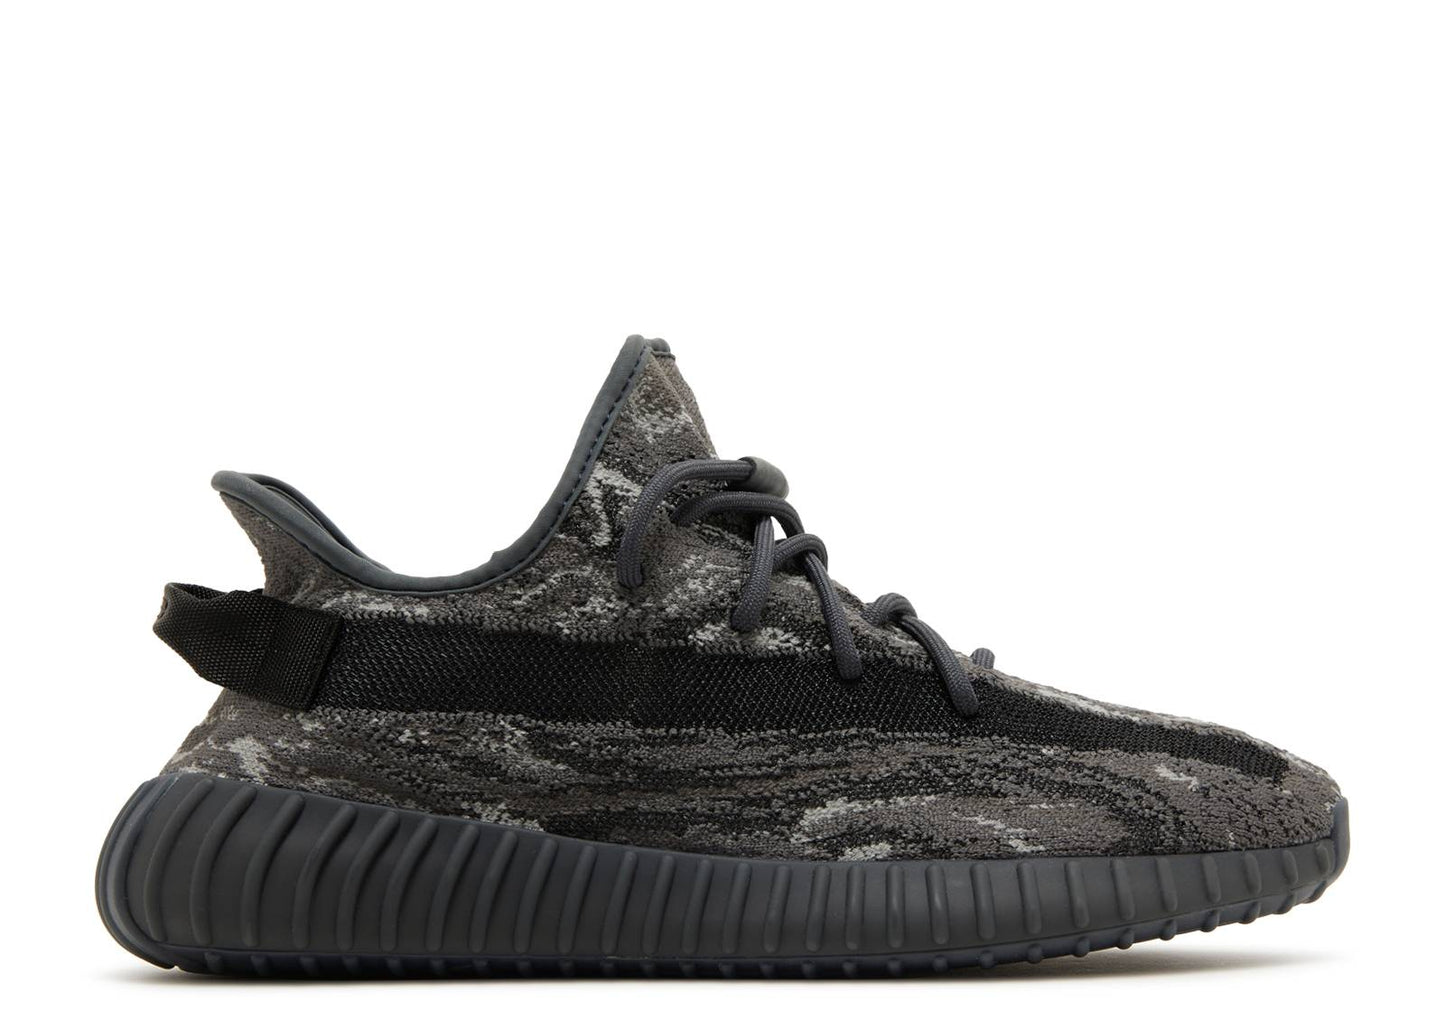 Adidas Yeezy Foam Runner With Free Shipping, Size: 6 To 11 Uk Size